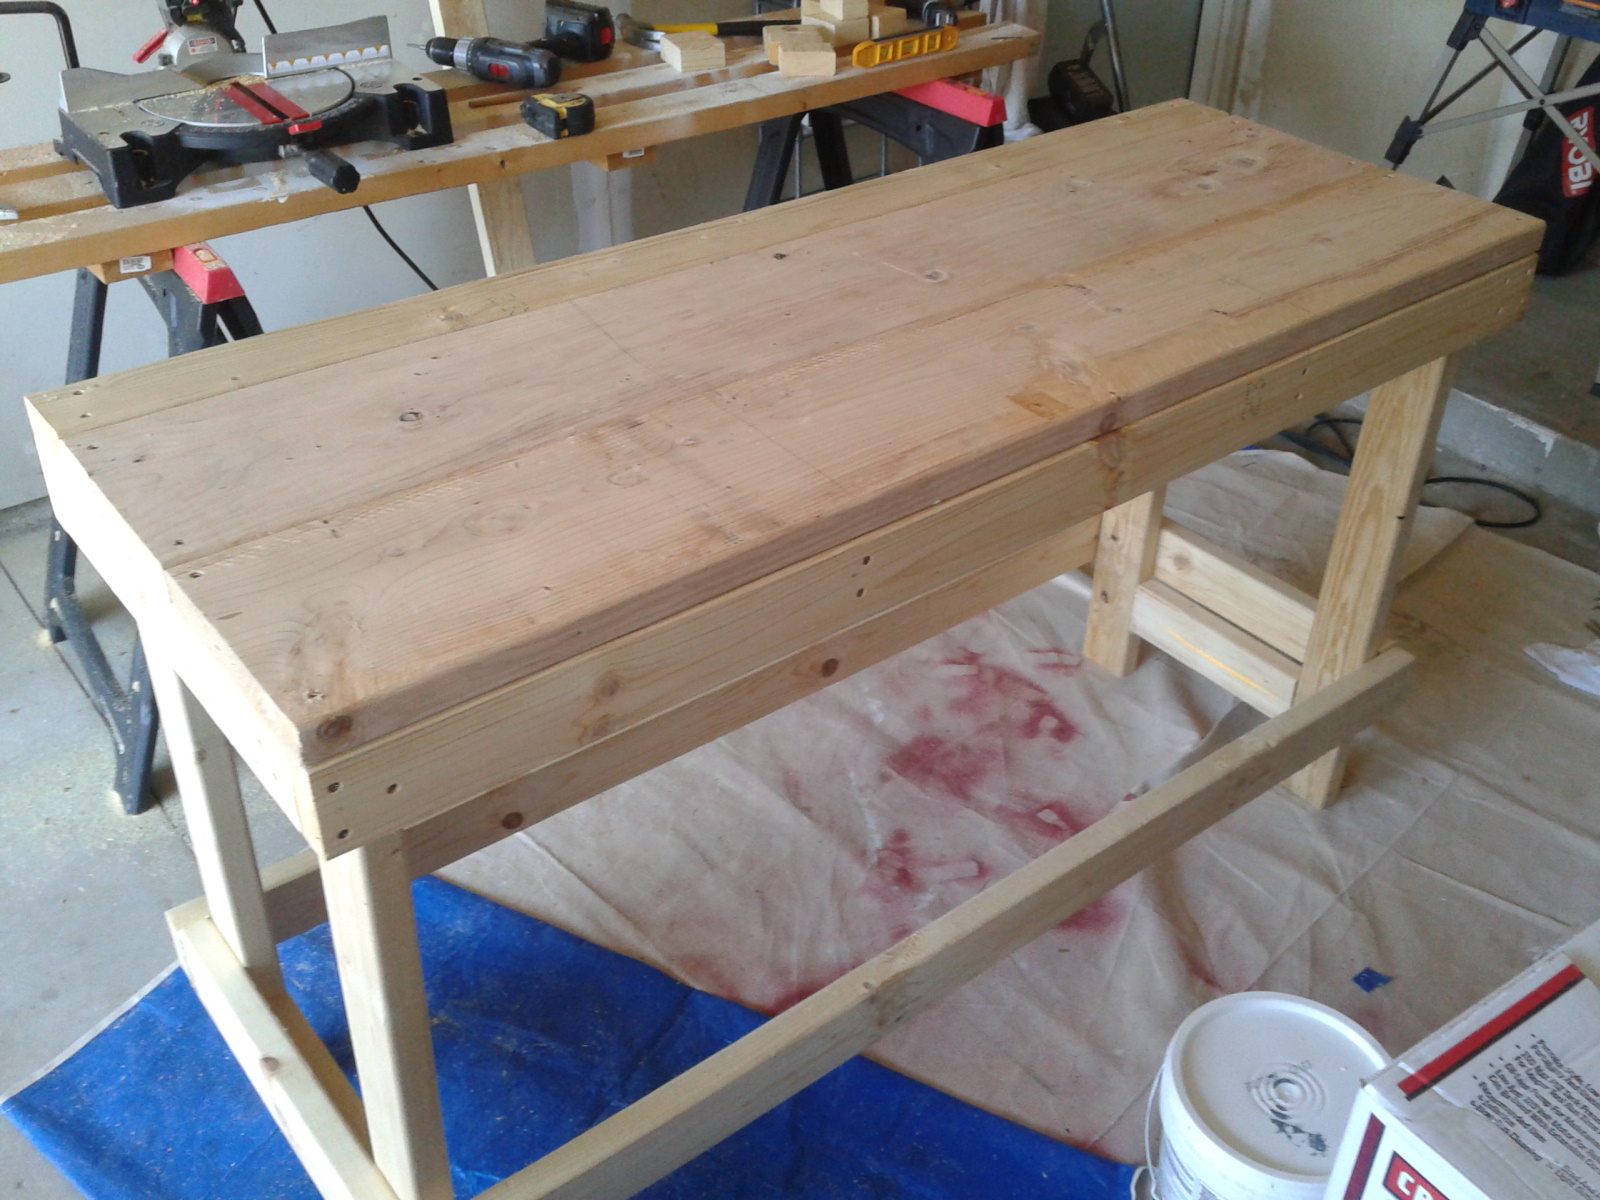 A Hodgepodge of Odds and Ends: Under $30 Garage Workbench